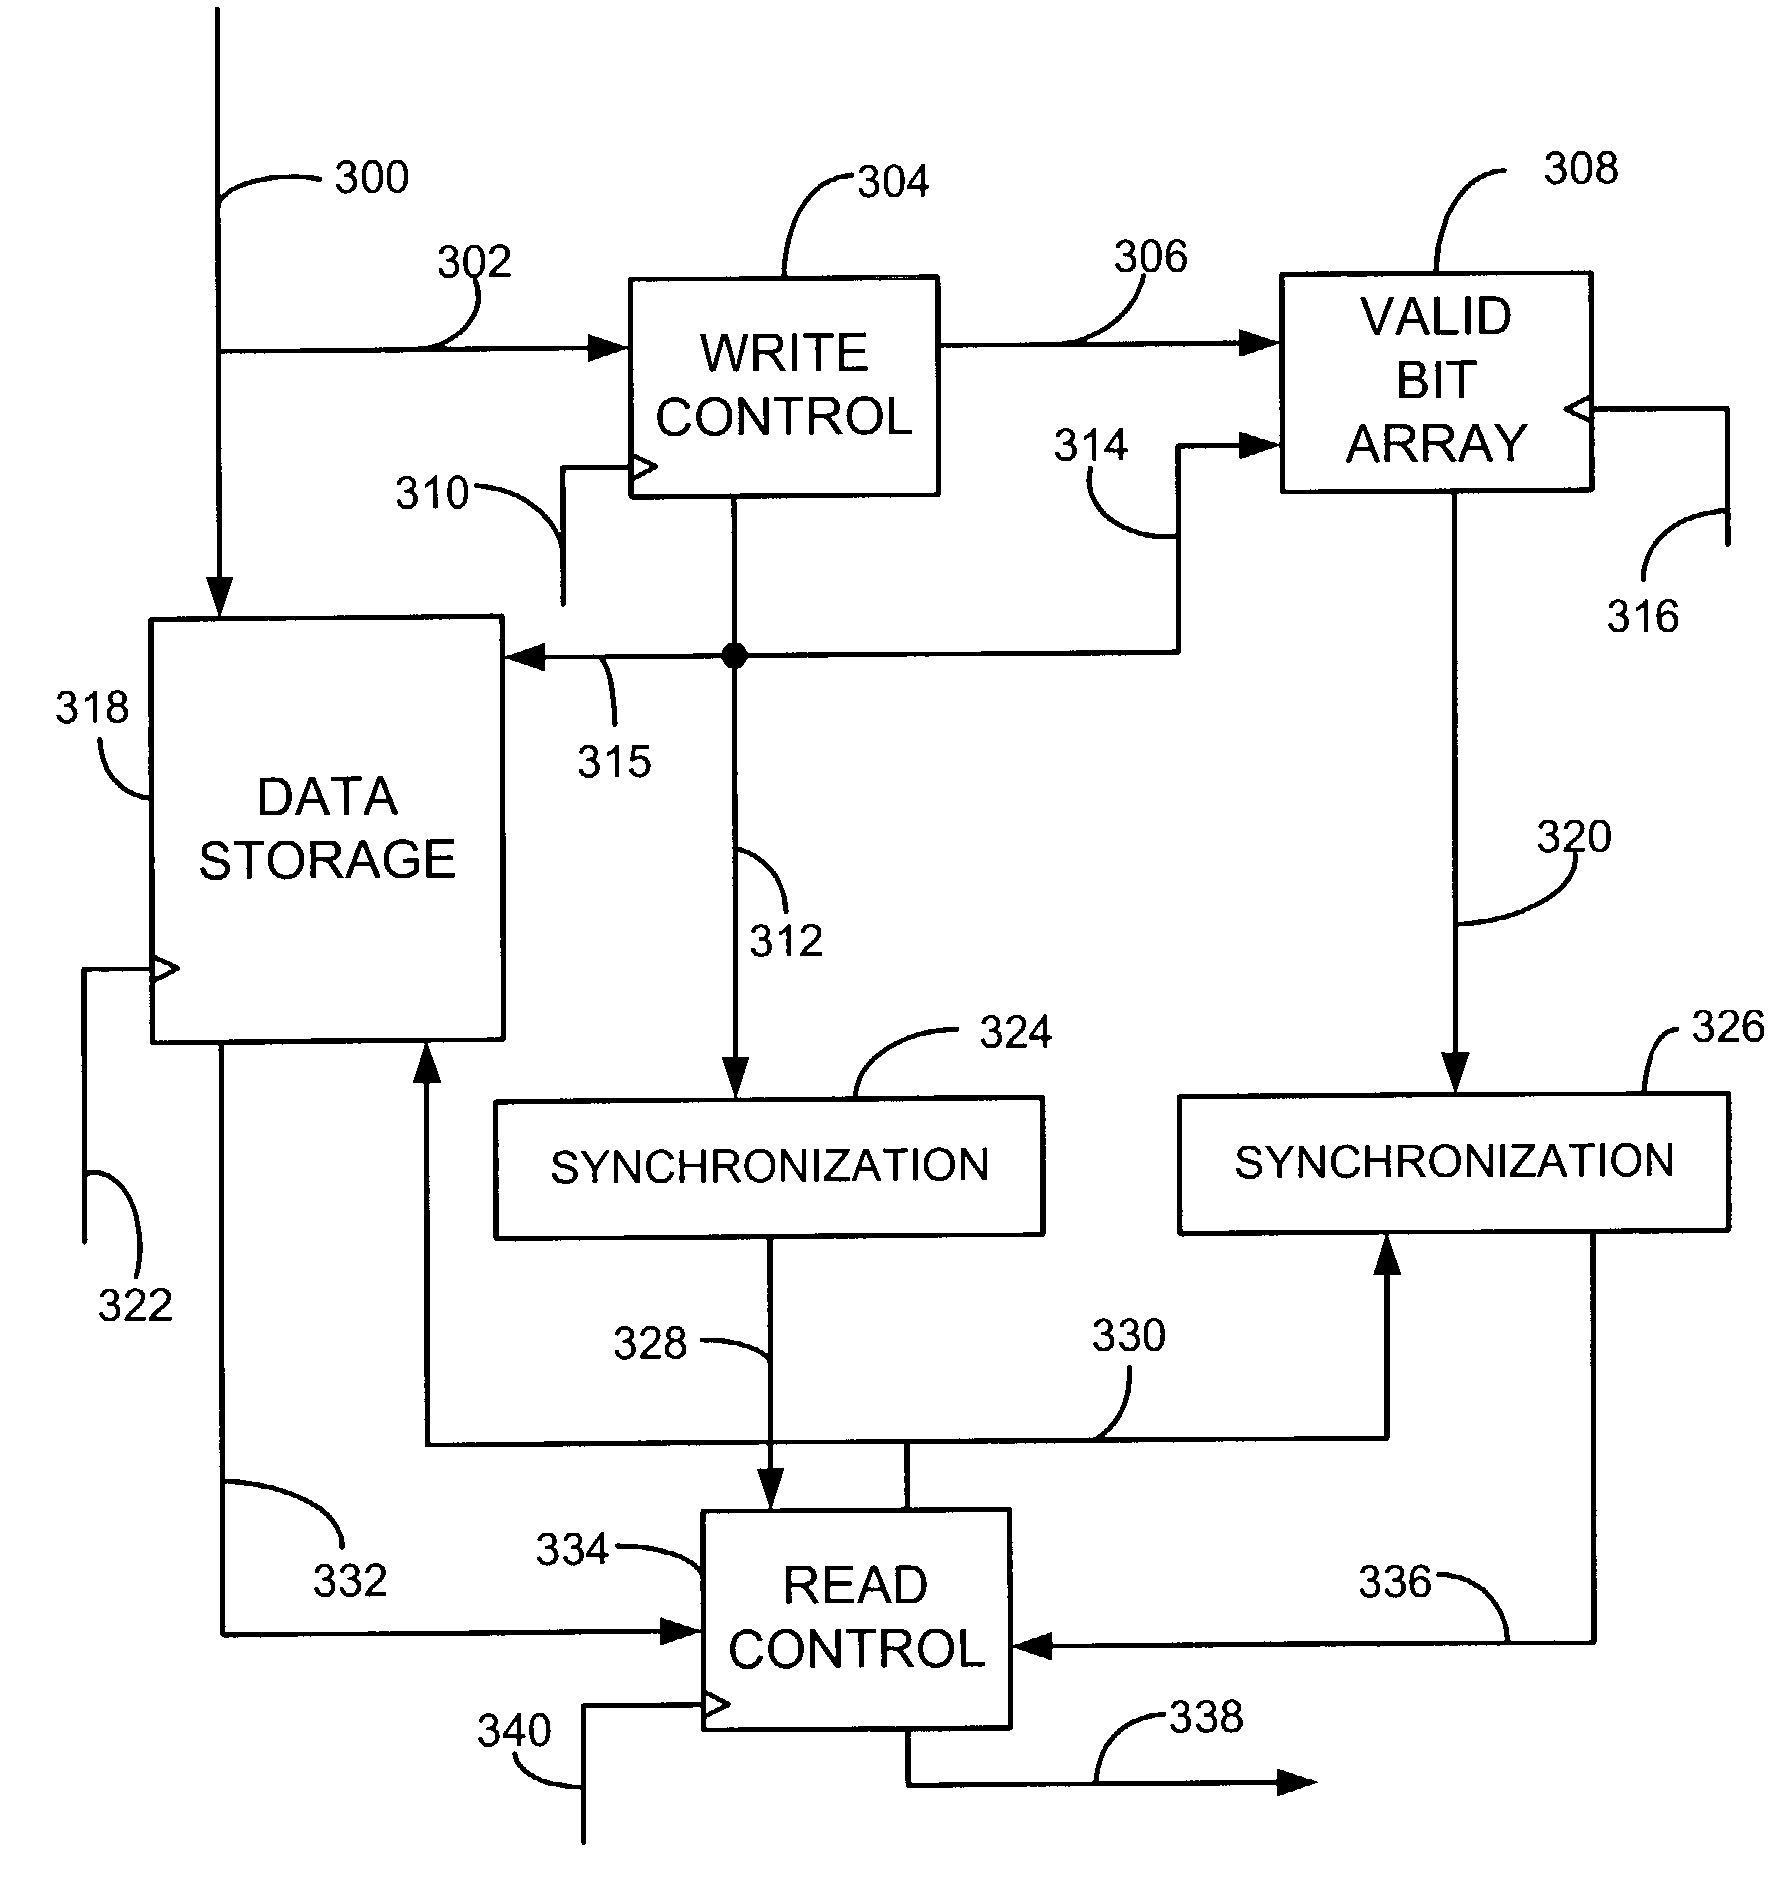 Method and apparatus for asynchronous read control